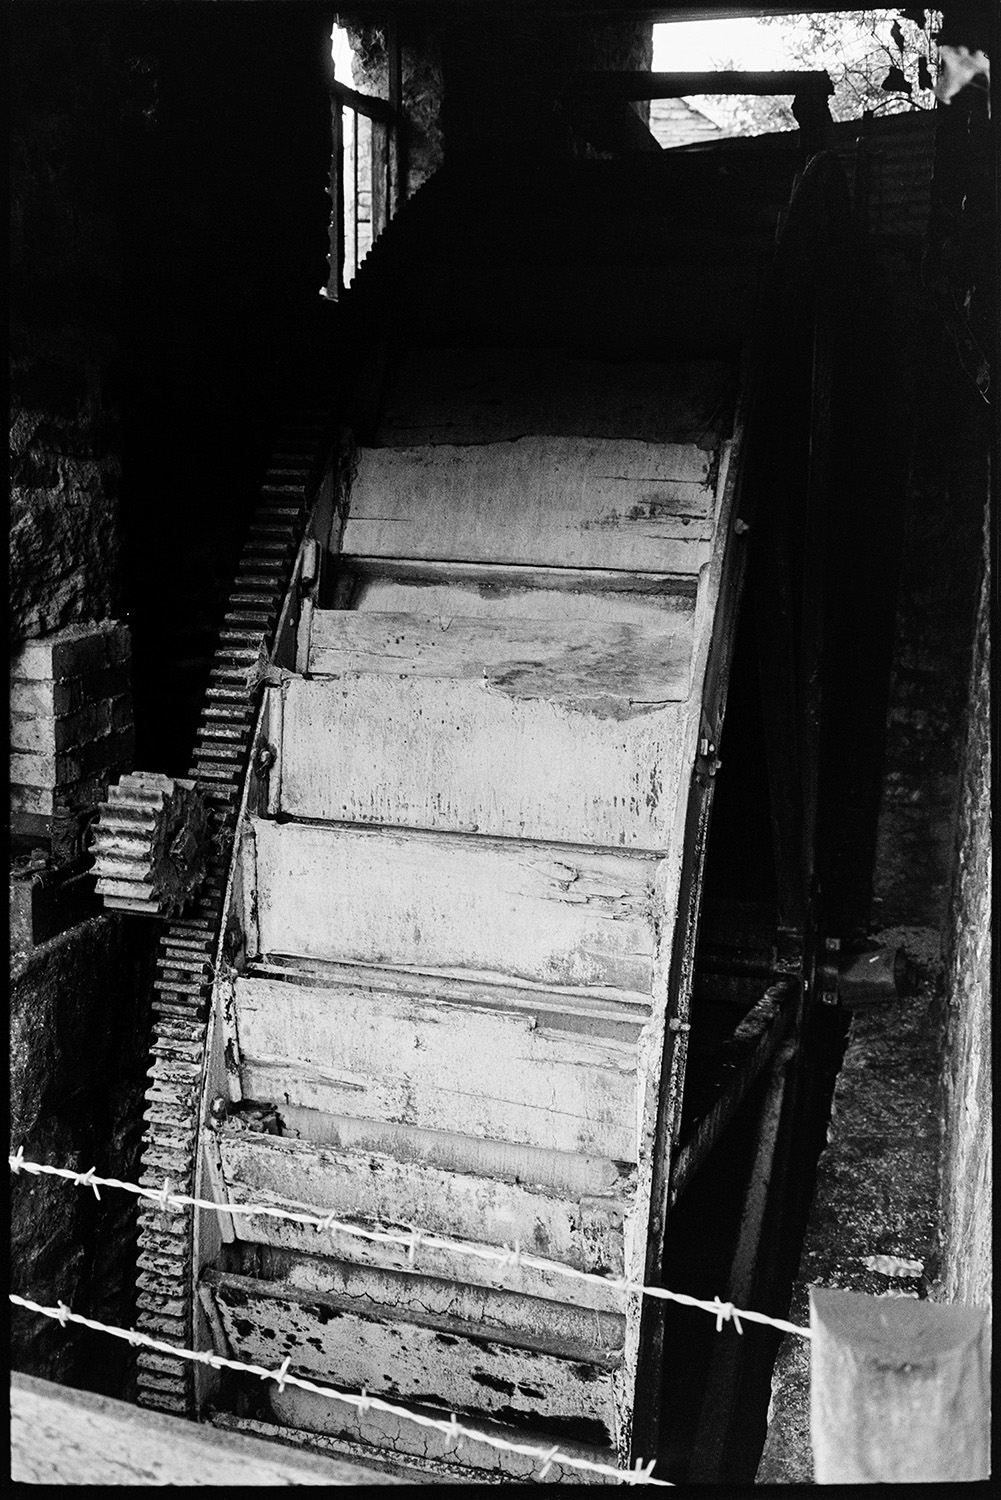 Mill wheel, undershot.
[Old mill wheel and undershot in a shed at West Chapple Farm near Winkleigh. Barbed wire is visible in the foreground.]